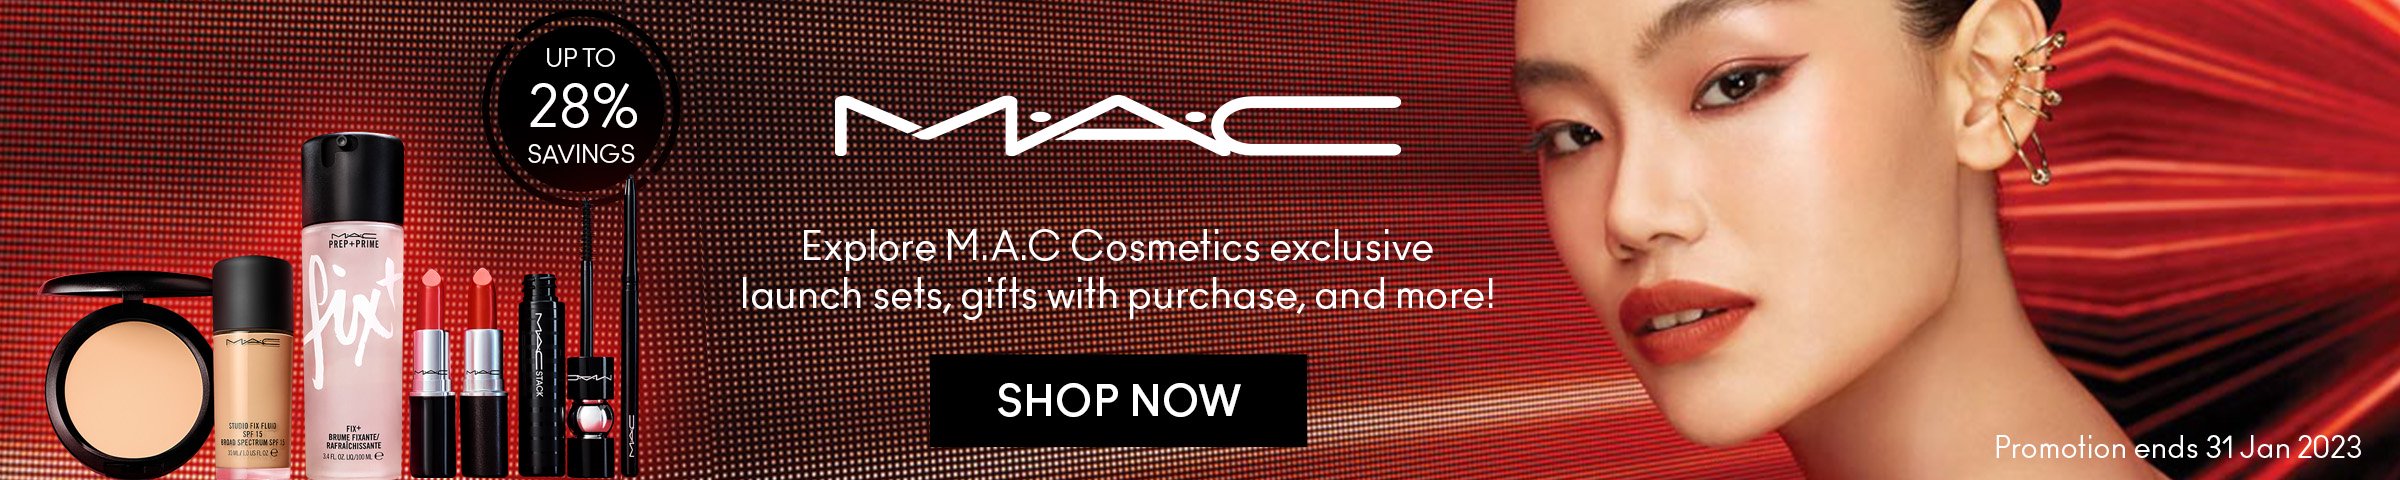 MAC Official Brand Store Launch: Up to 28% savings